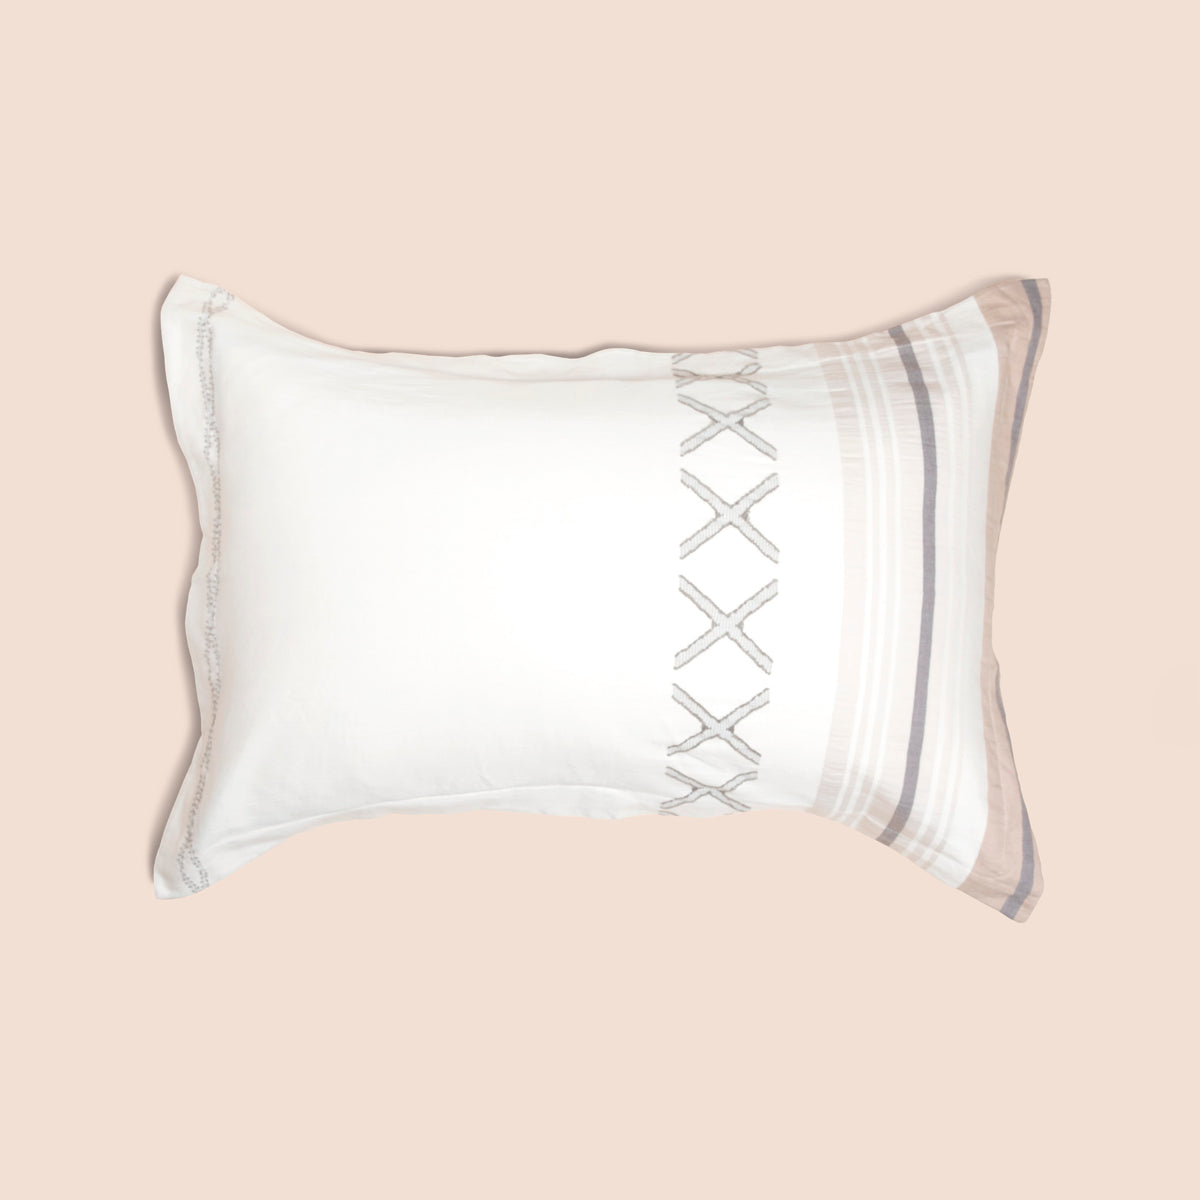 Image of a Sonoran Pillow Sham on a pillow with a light pink background